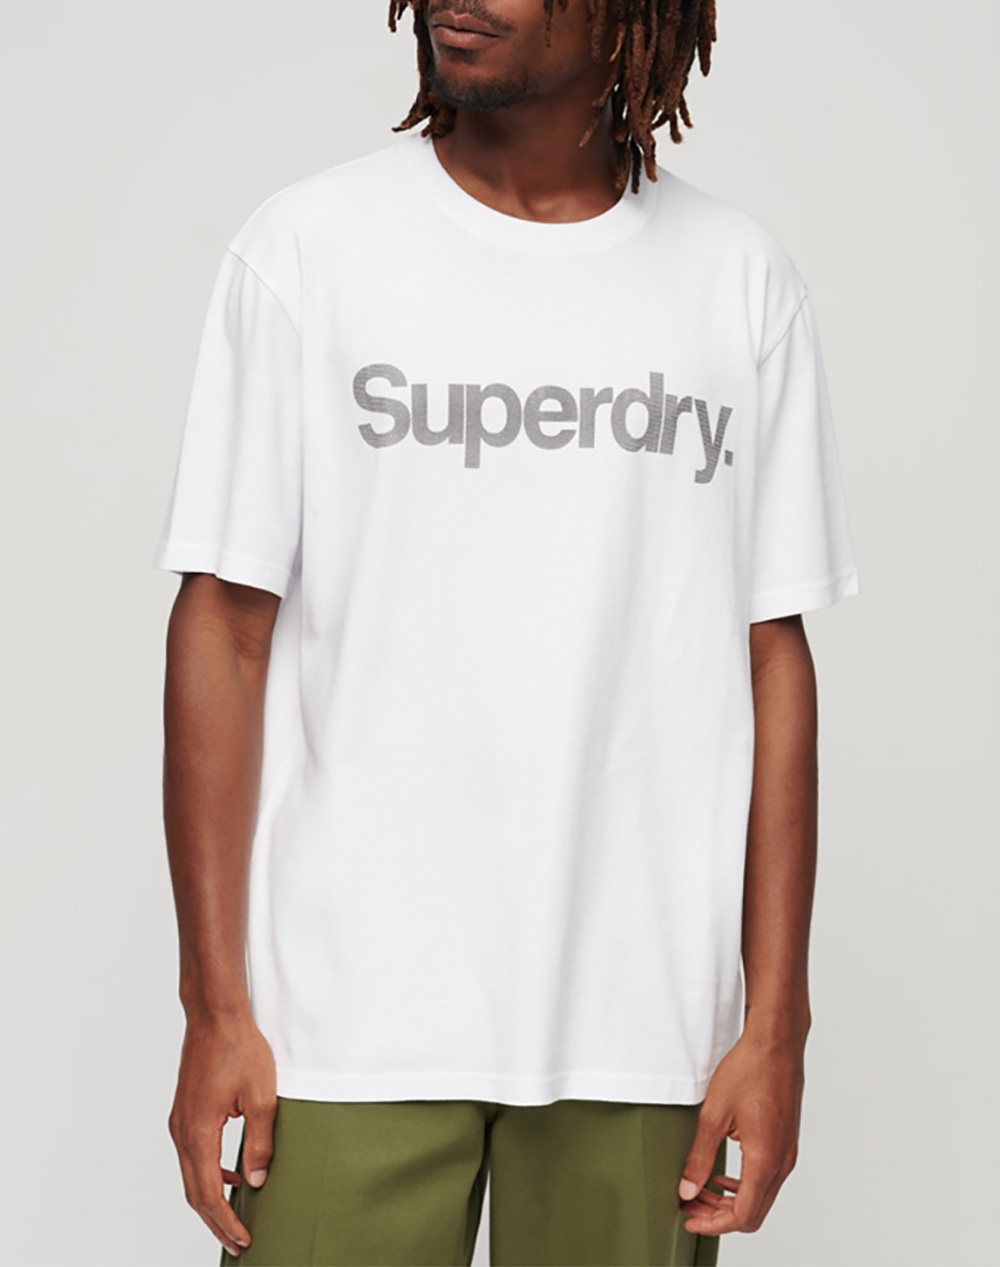 SUPERDRY D1 SDCD CORE LOGO CITY LOOSE TEE ΜΠΛΟΥΖΑ ΑΝΔΡΙΚΟ M1011928A-01C White 3820ASUPE3400324_1929